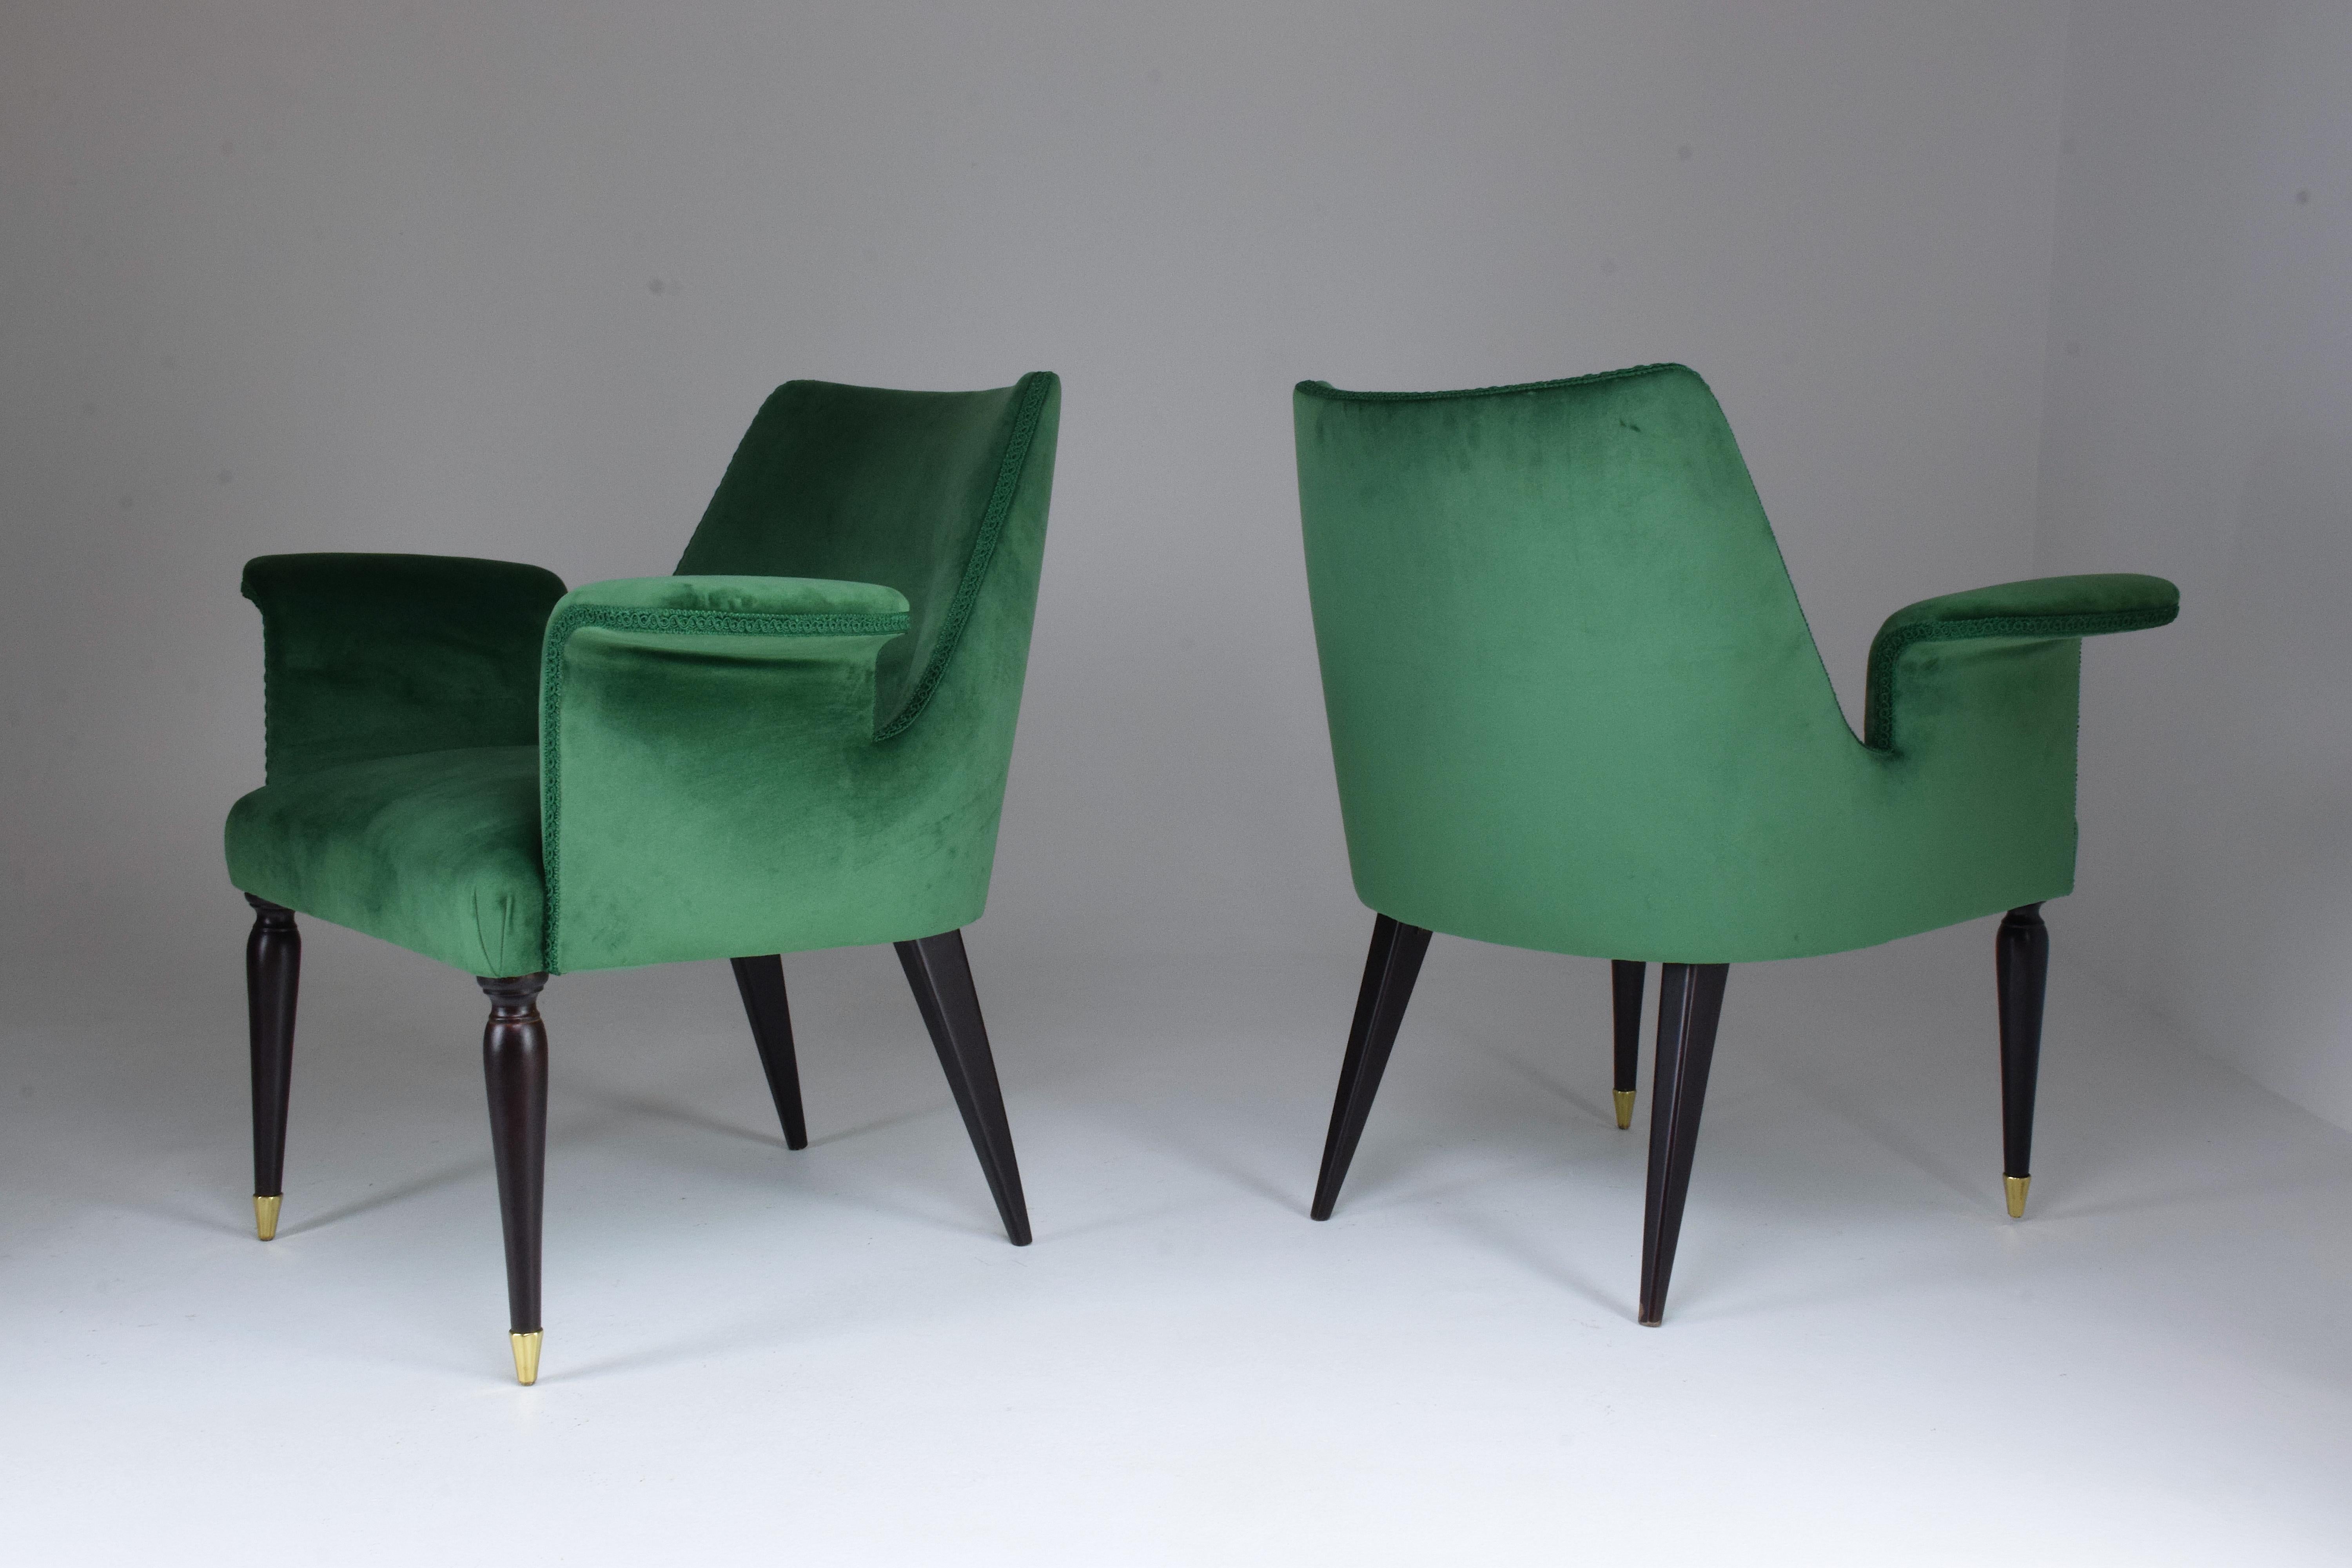 A set of two midcentury armchairs, circa 1940s. These have been expertly restored, through new finish and re-upholstered in a deep green velvet with new padding and beautiful upholstery trimmings.
The legs a tapered and splayed with a classic twist